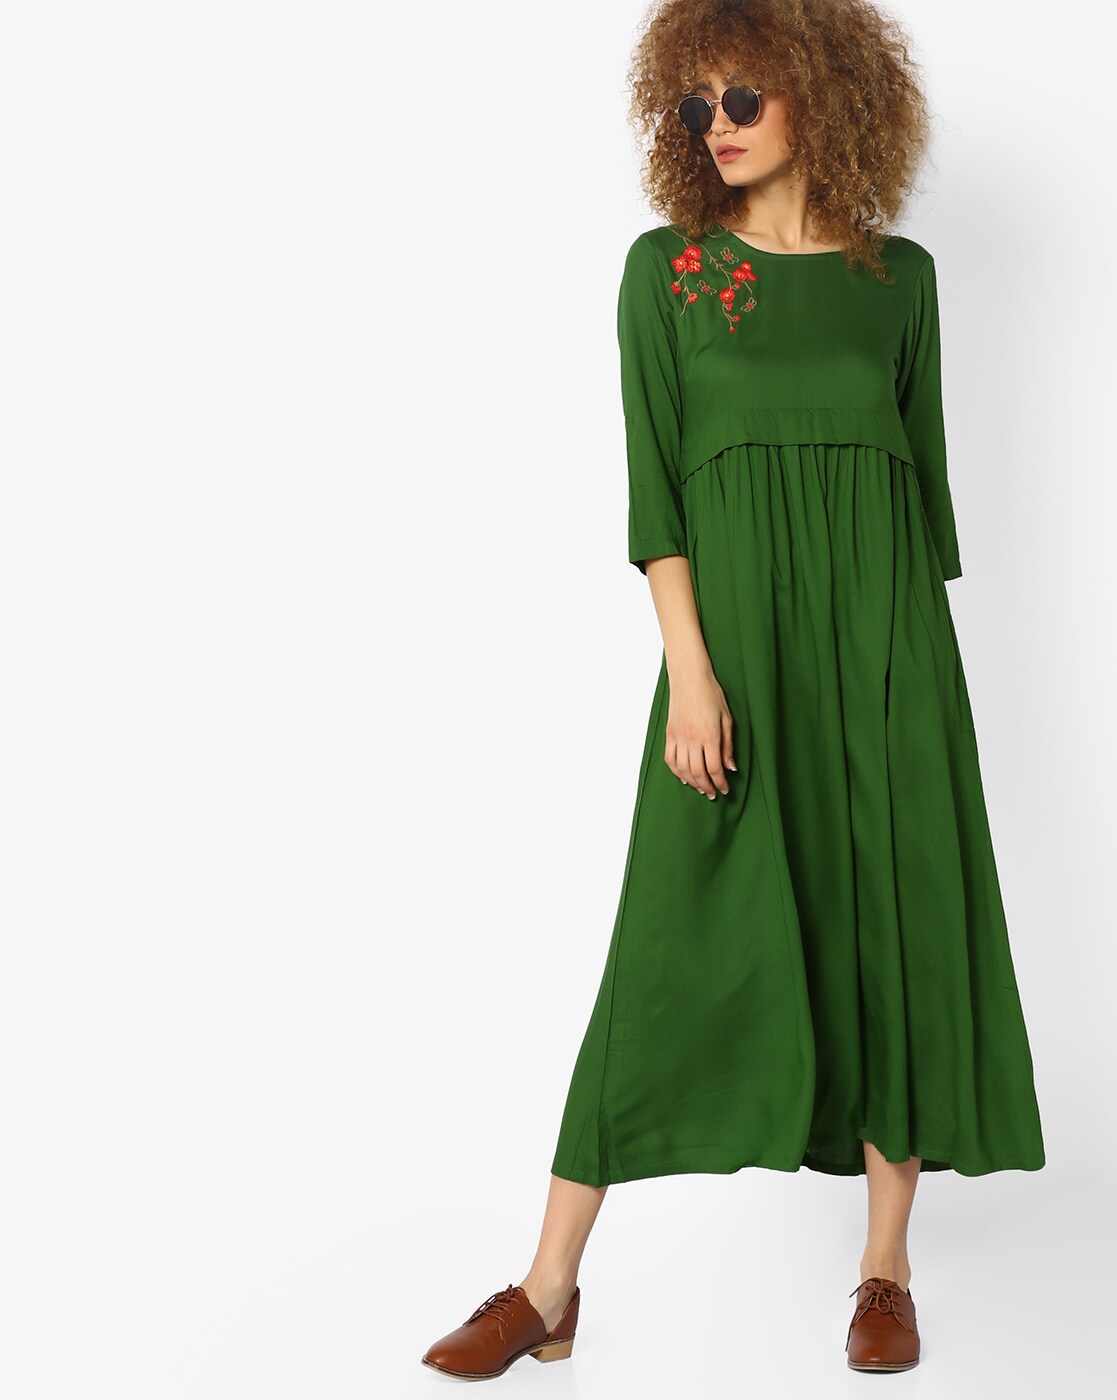 Buy Green Dresses & Gowns for Women by COUNTRY STYLE Online | Ajio.com